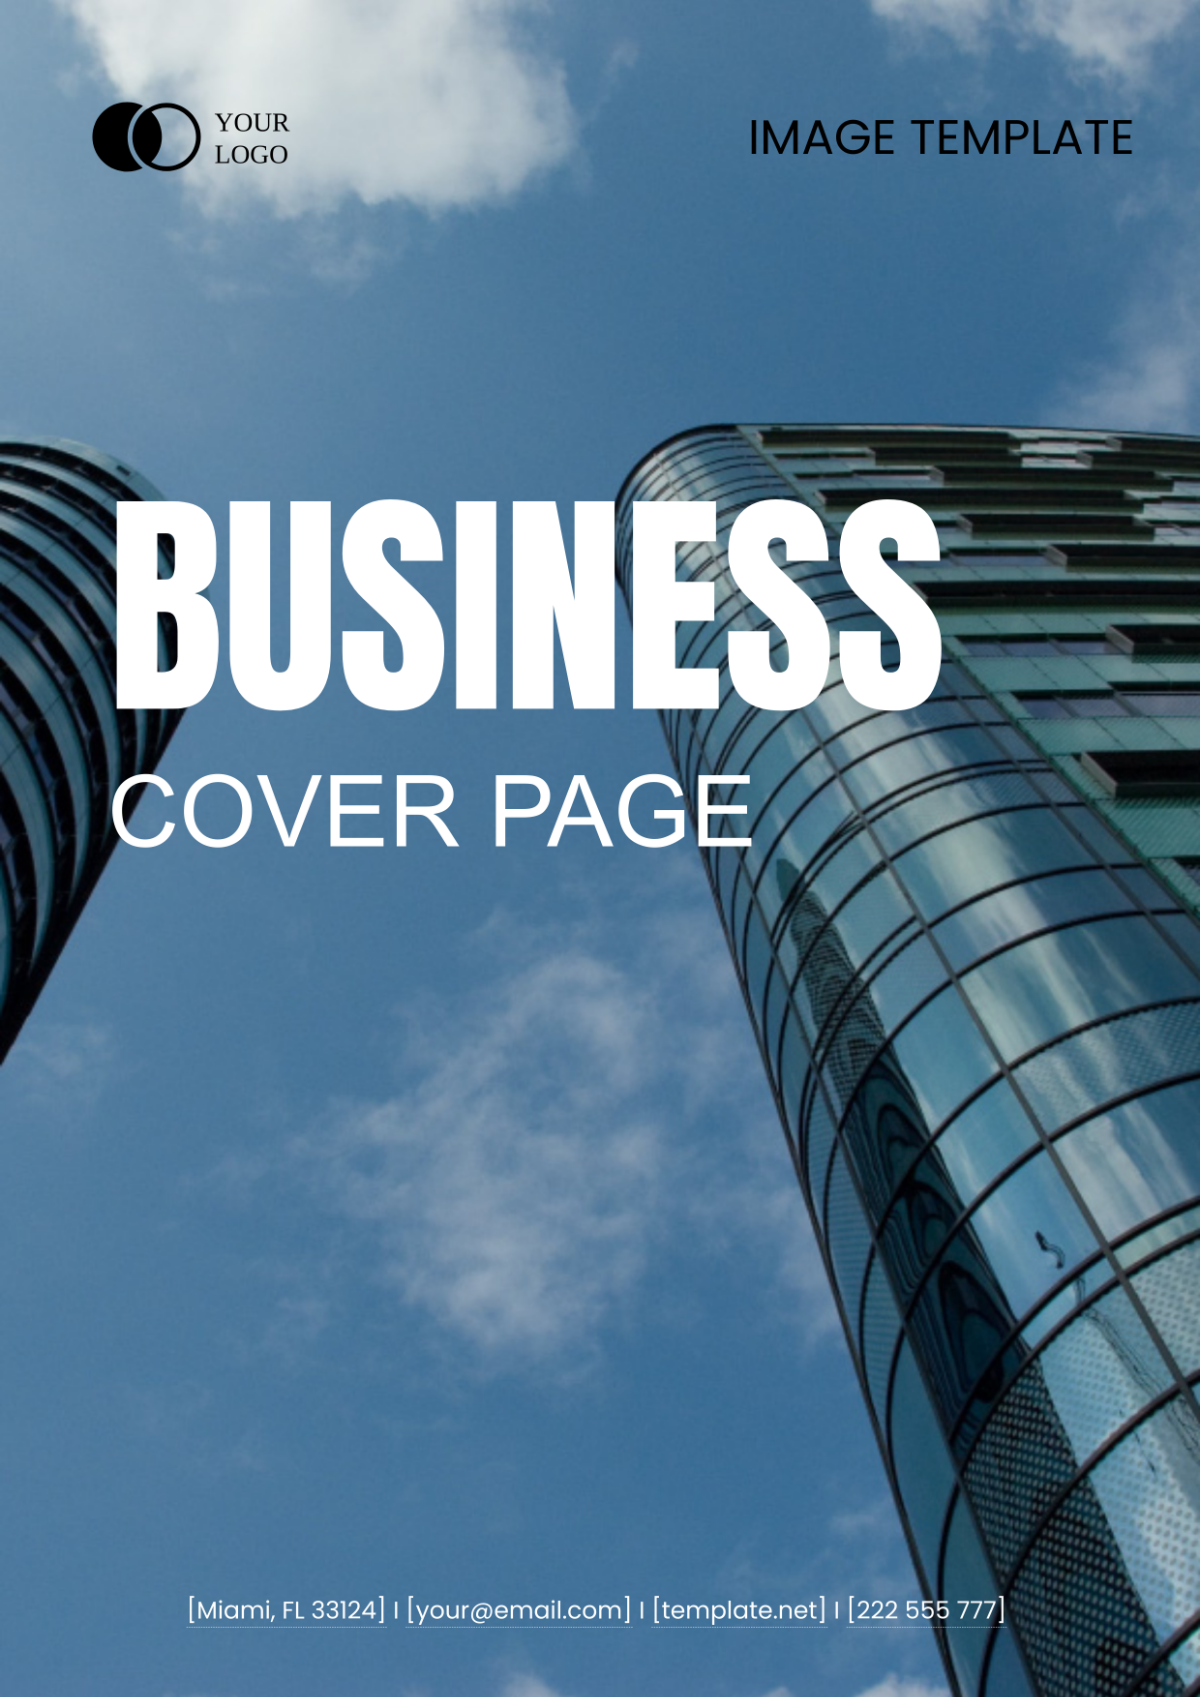 Business Cover Page Image Template